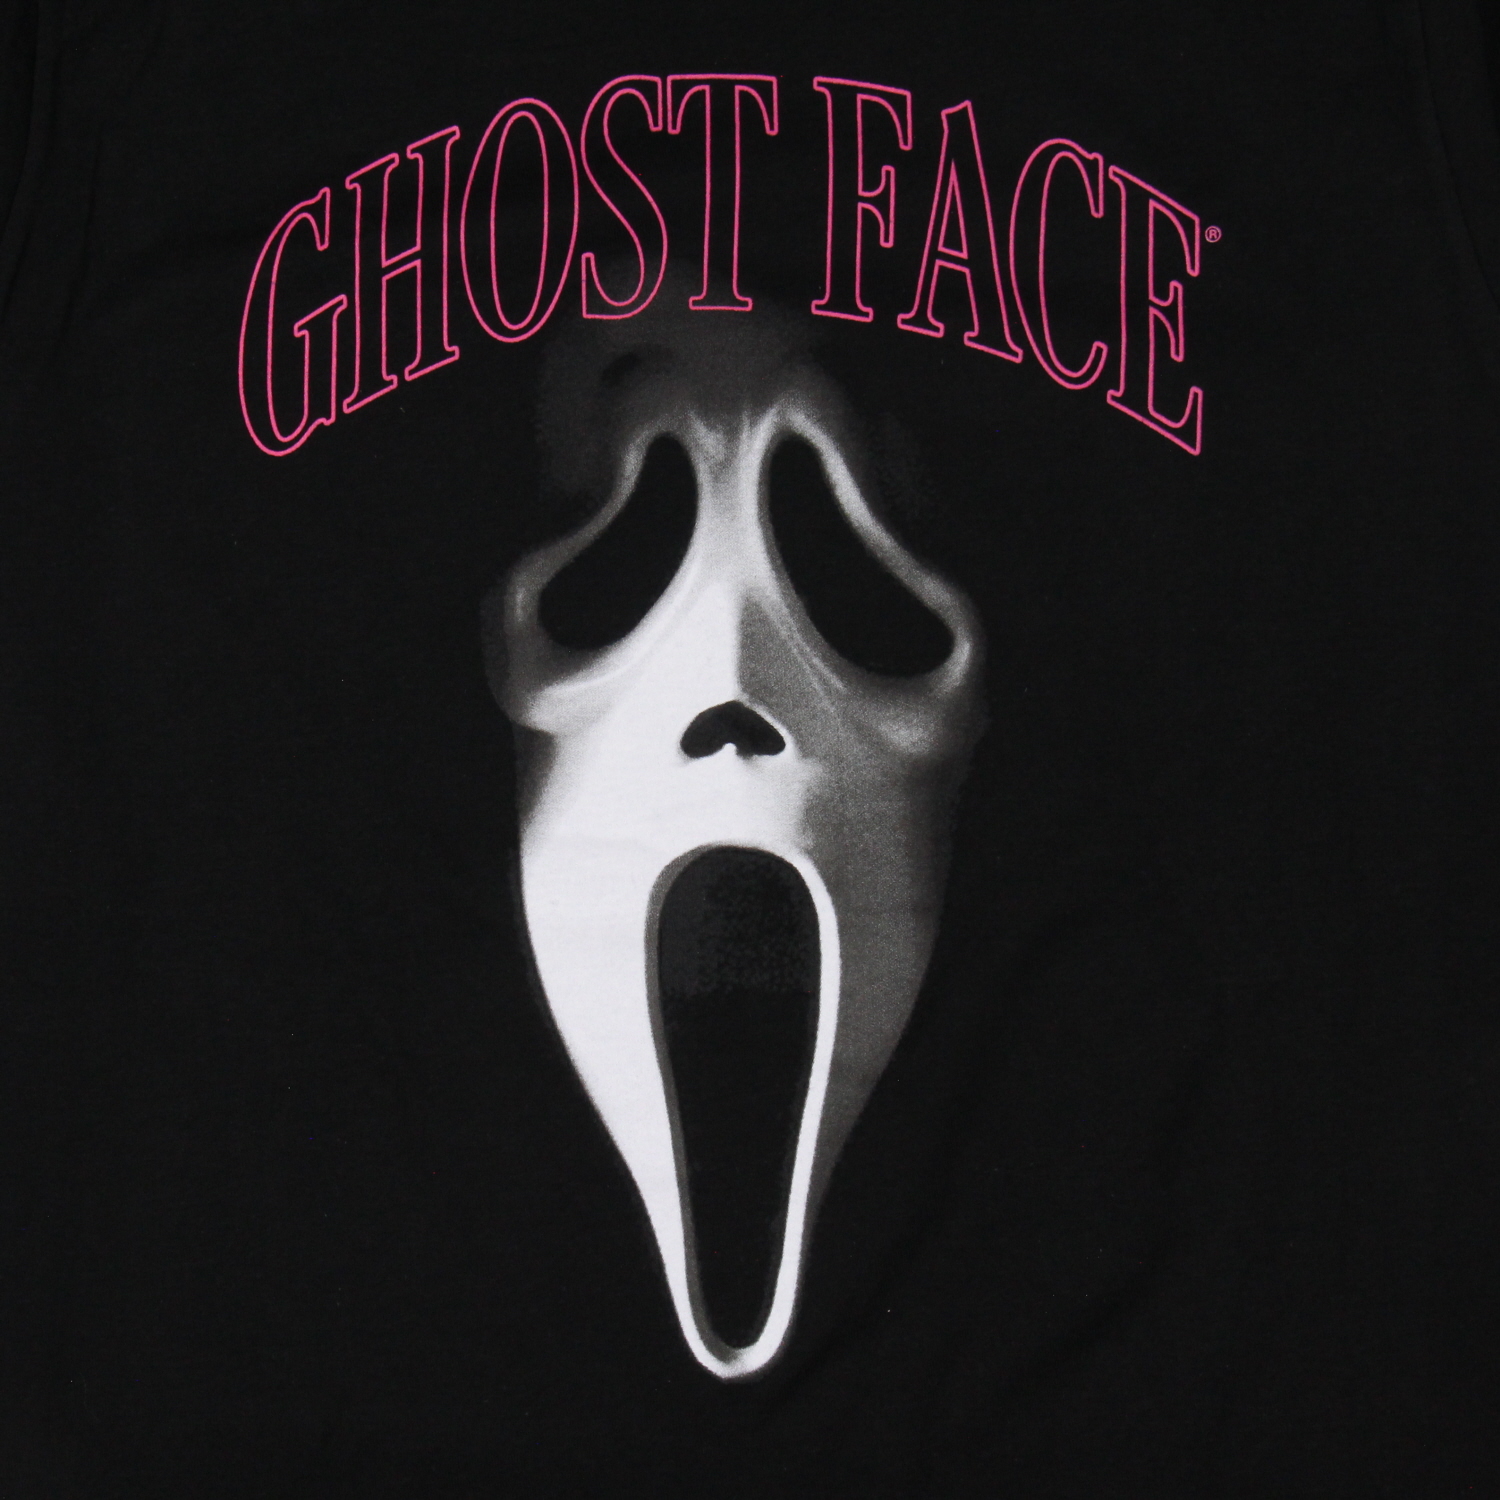 Seven Times Six Scream Mens' Ghost Face Mask Disguise Horror Film Graphic Print T-Shirt